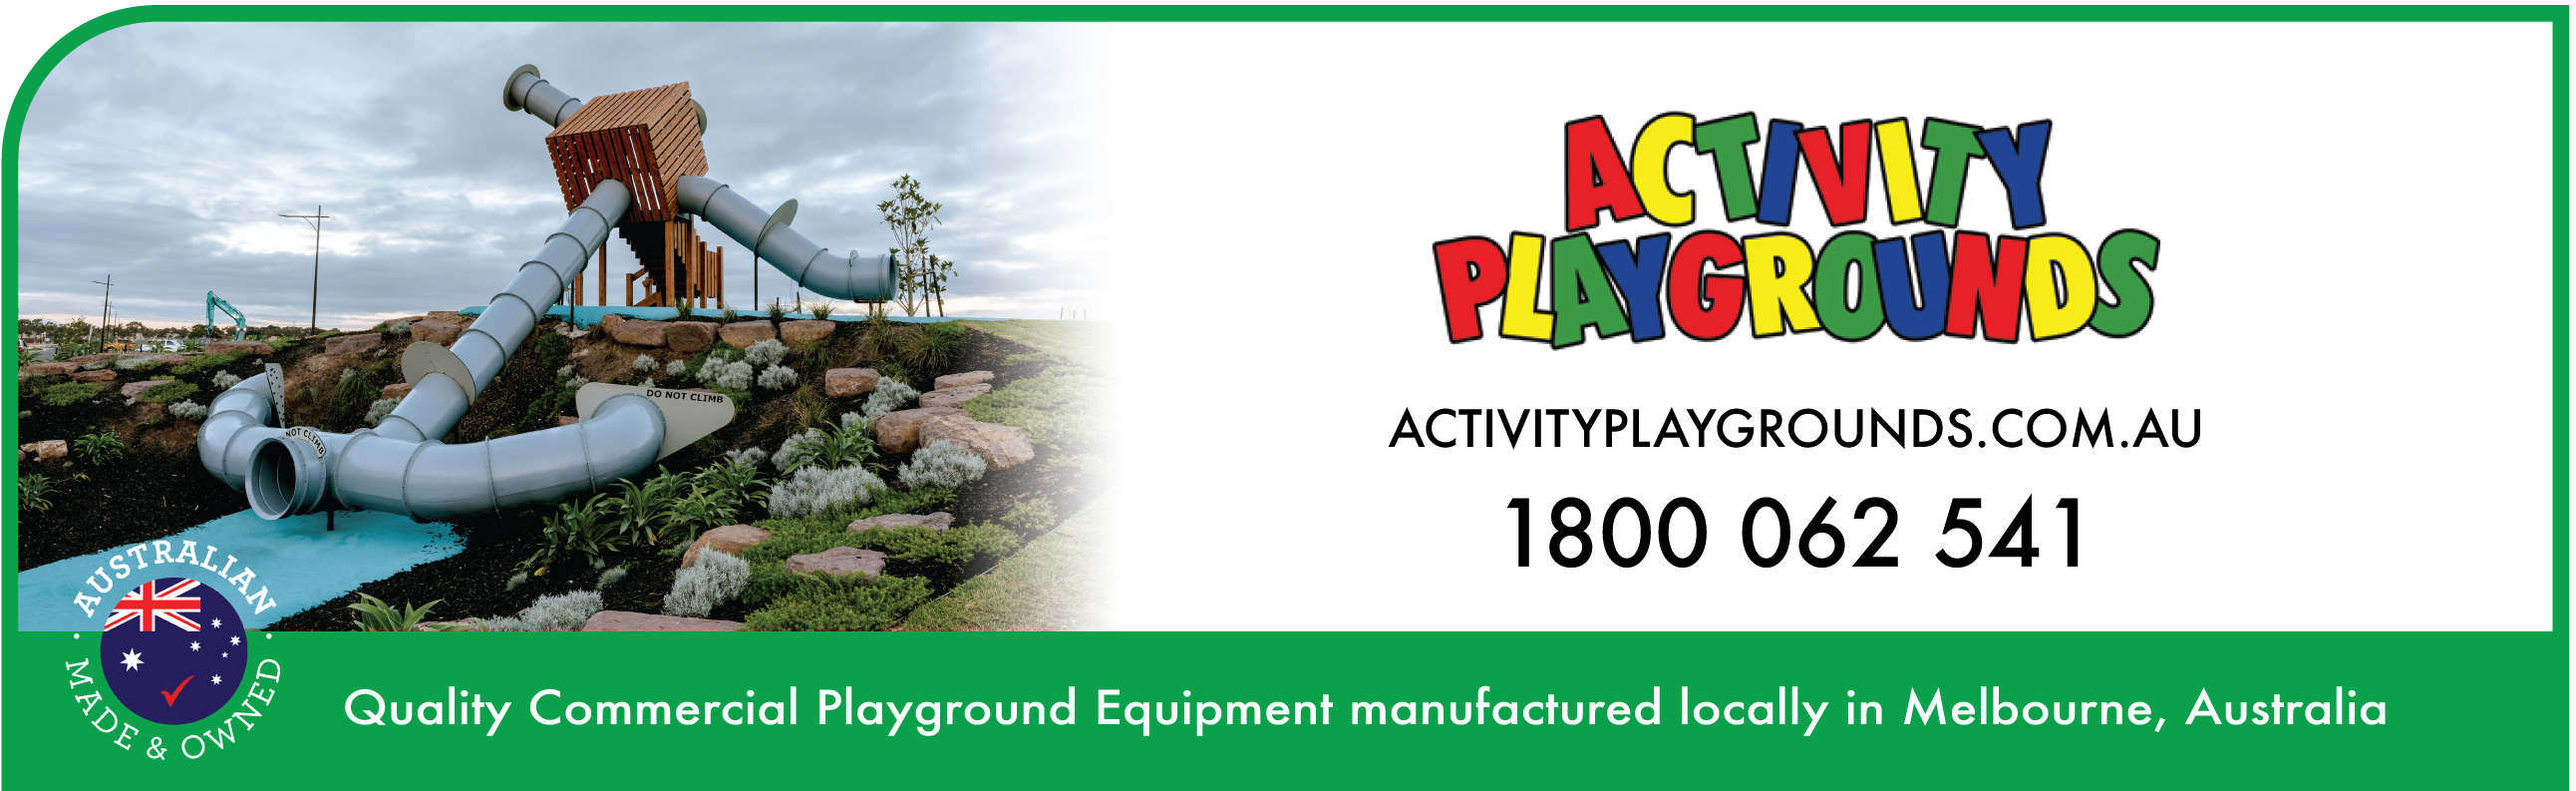 Activity Playgrounds | ODS